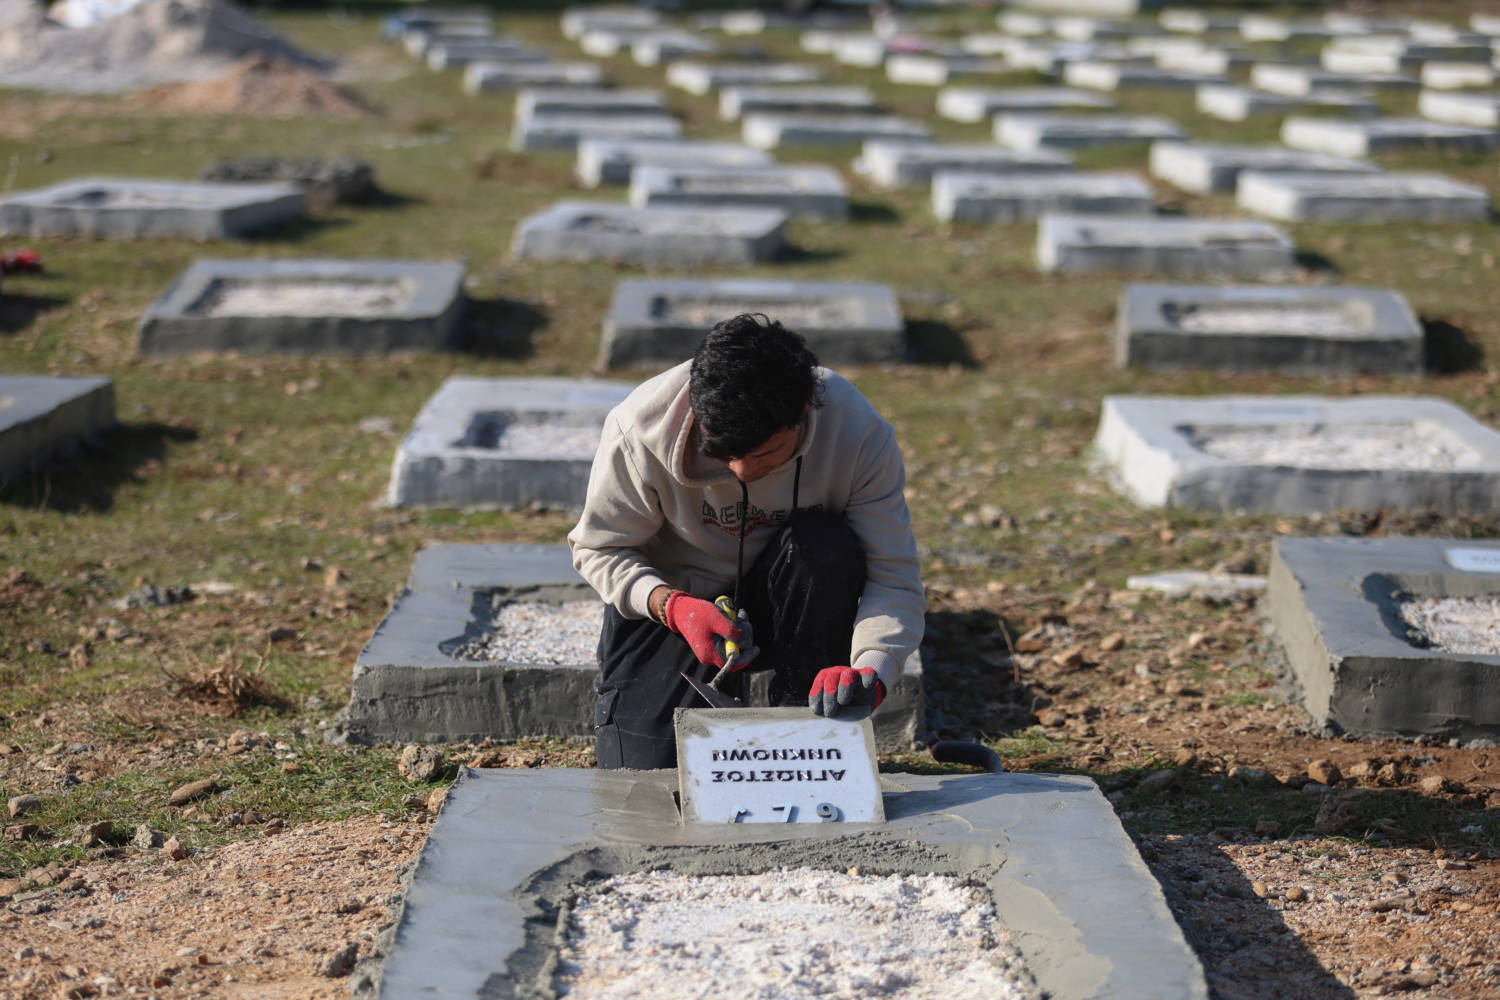 Renovated Burial Ground For Asylum Seekers Opens On Greece's Lesbos Island